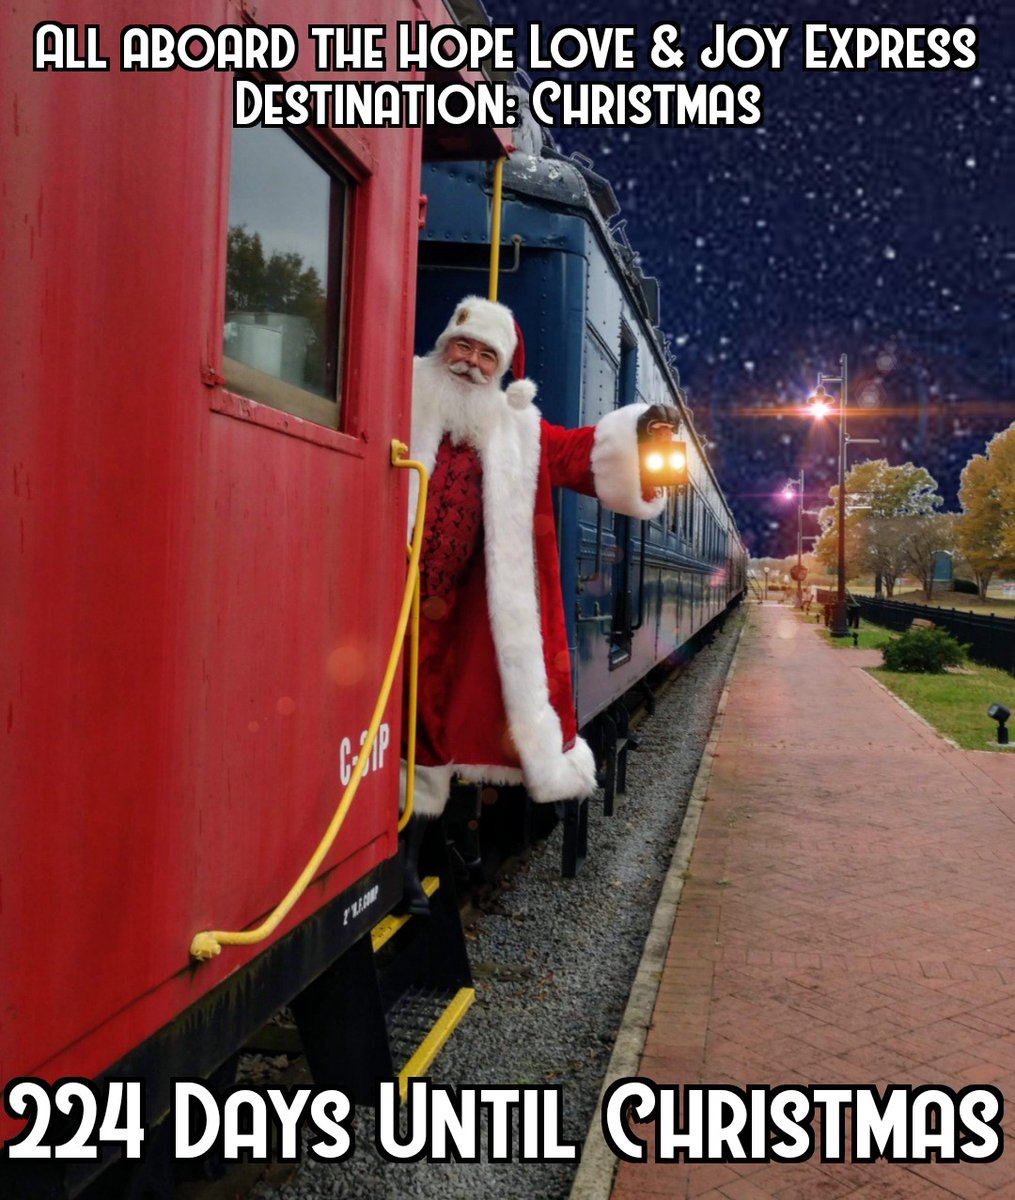 Happy Wednesday Everyone! Climb aboard the Hope, Love & Joy Express. Always running, always on time & always free. Have a blessed day & be a blessing.

#christmascountdown #christmas #countdowntochristmas #HopeLoveJoy #blessing #blessed #wednesday #believe #share #eastcoastsanta